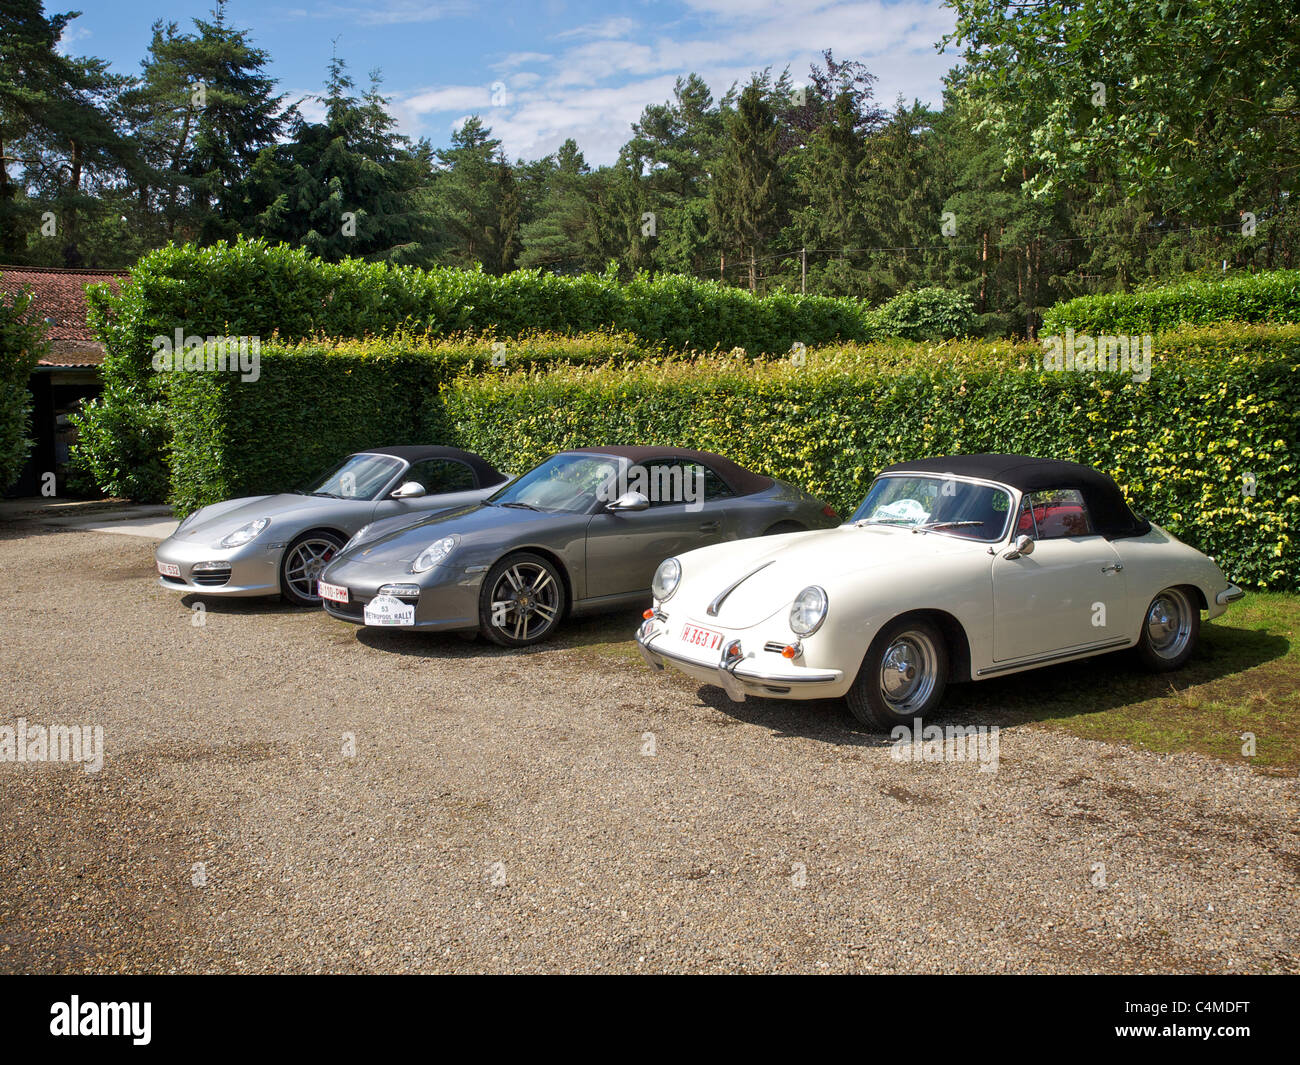 three different convertible Porsches parked in a row. front to back a 356, a 911, and a Boxster. Stock Photo